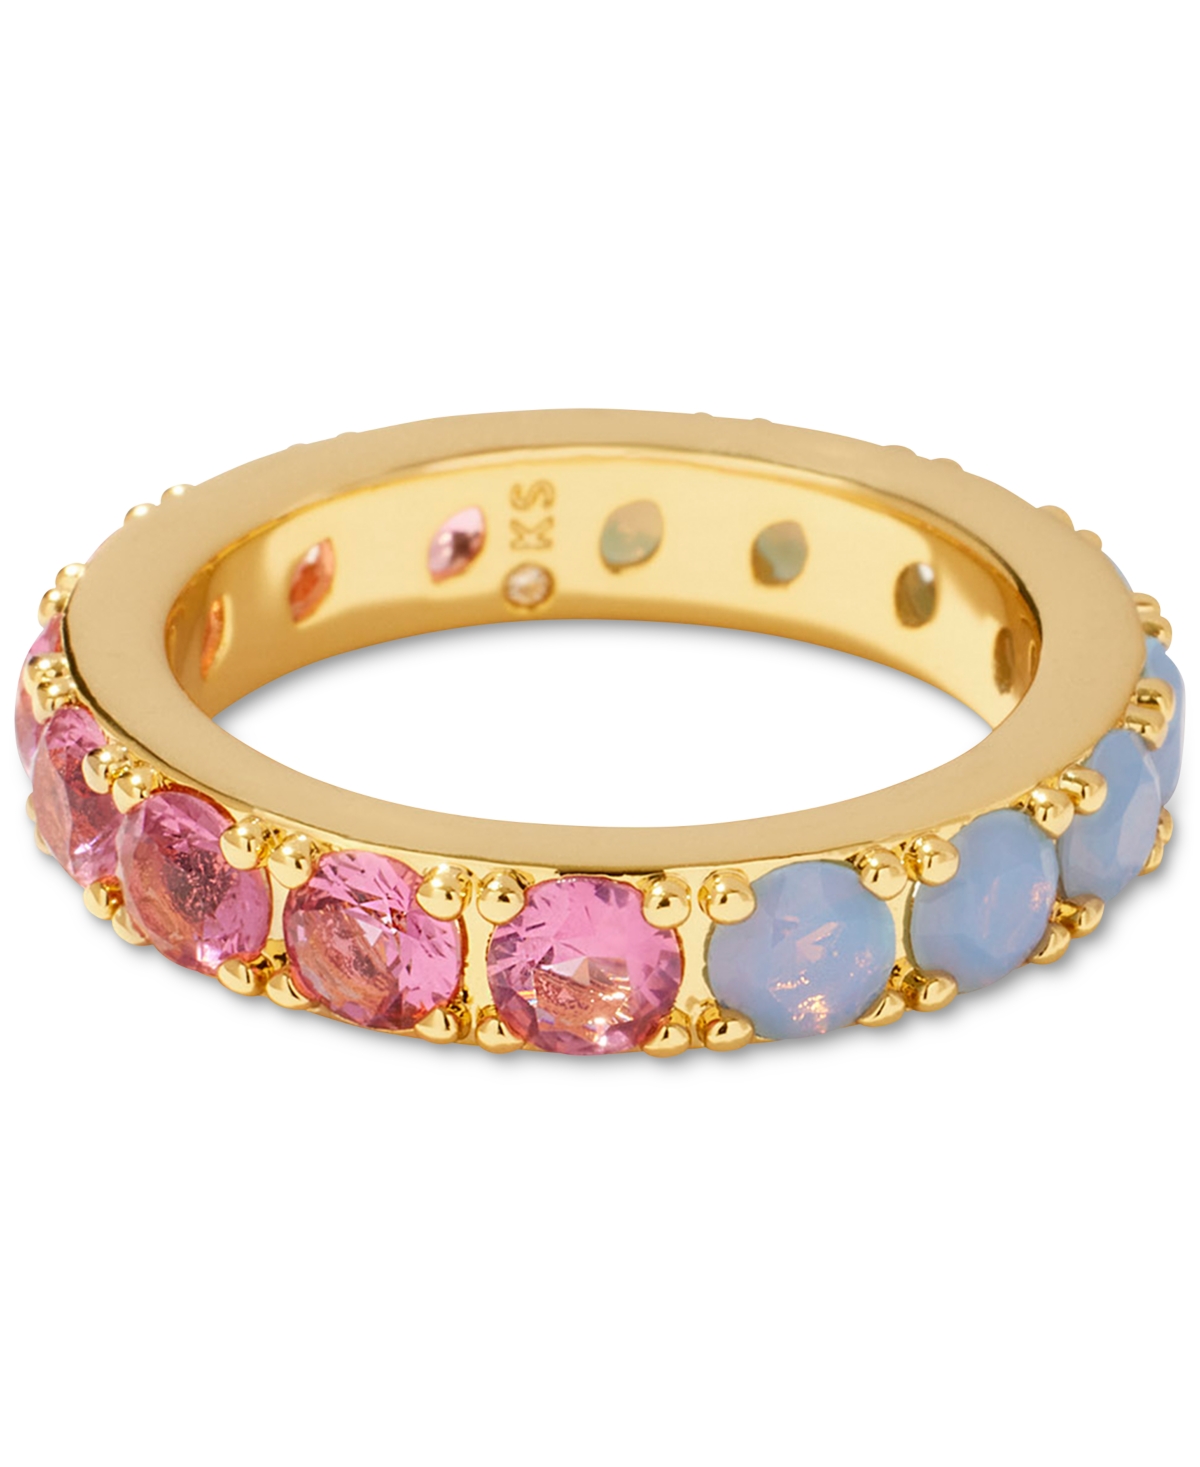 Kendra Scott 14k Gold-plated Mixed Stone Band Ring In Gold Pink